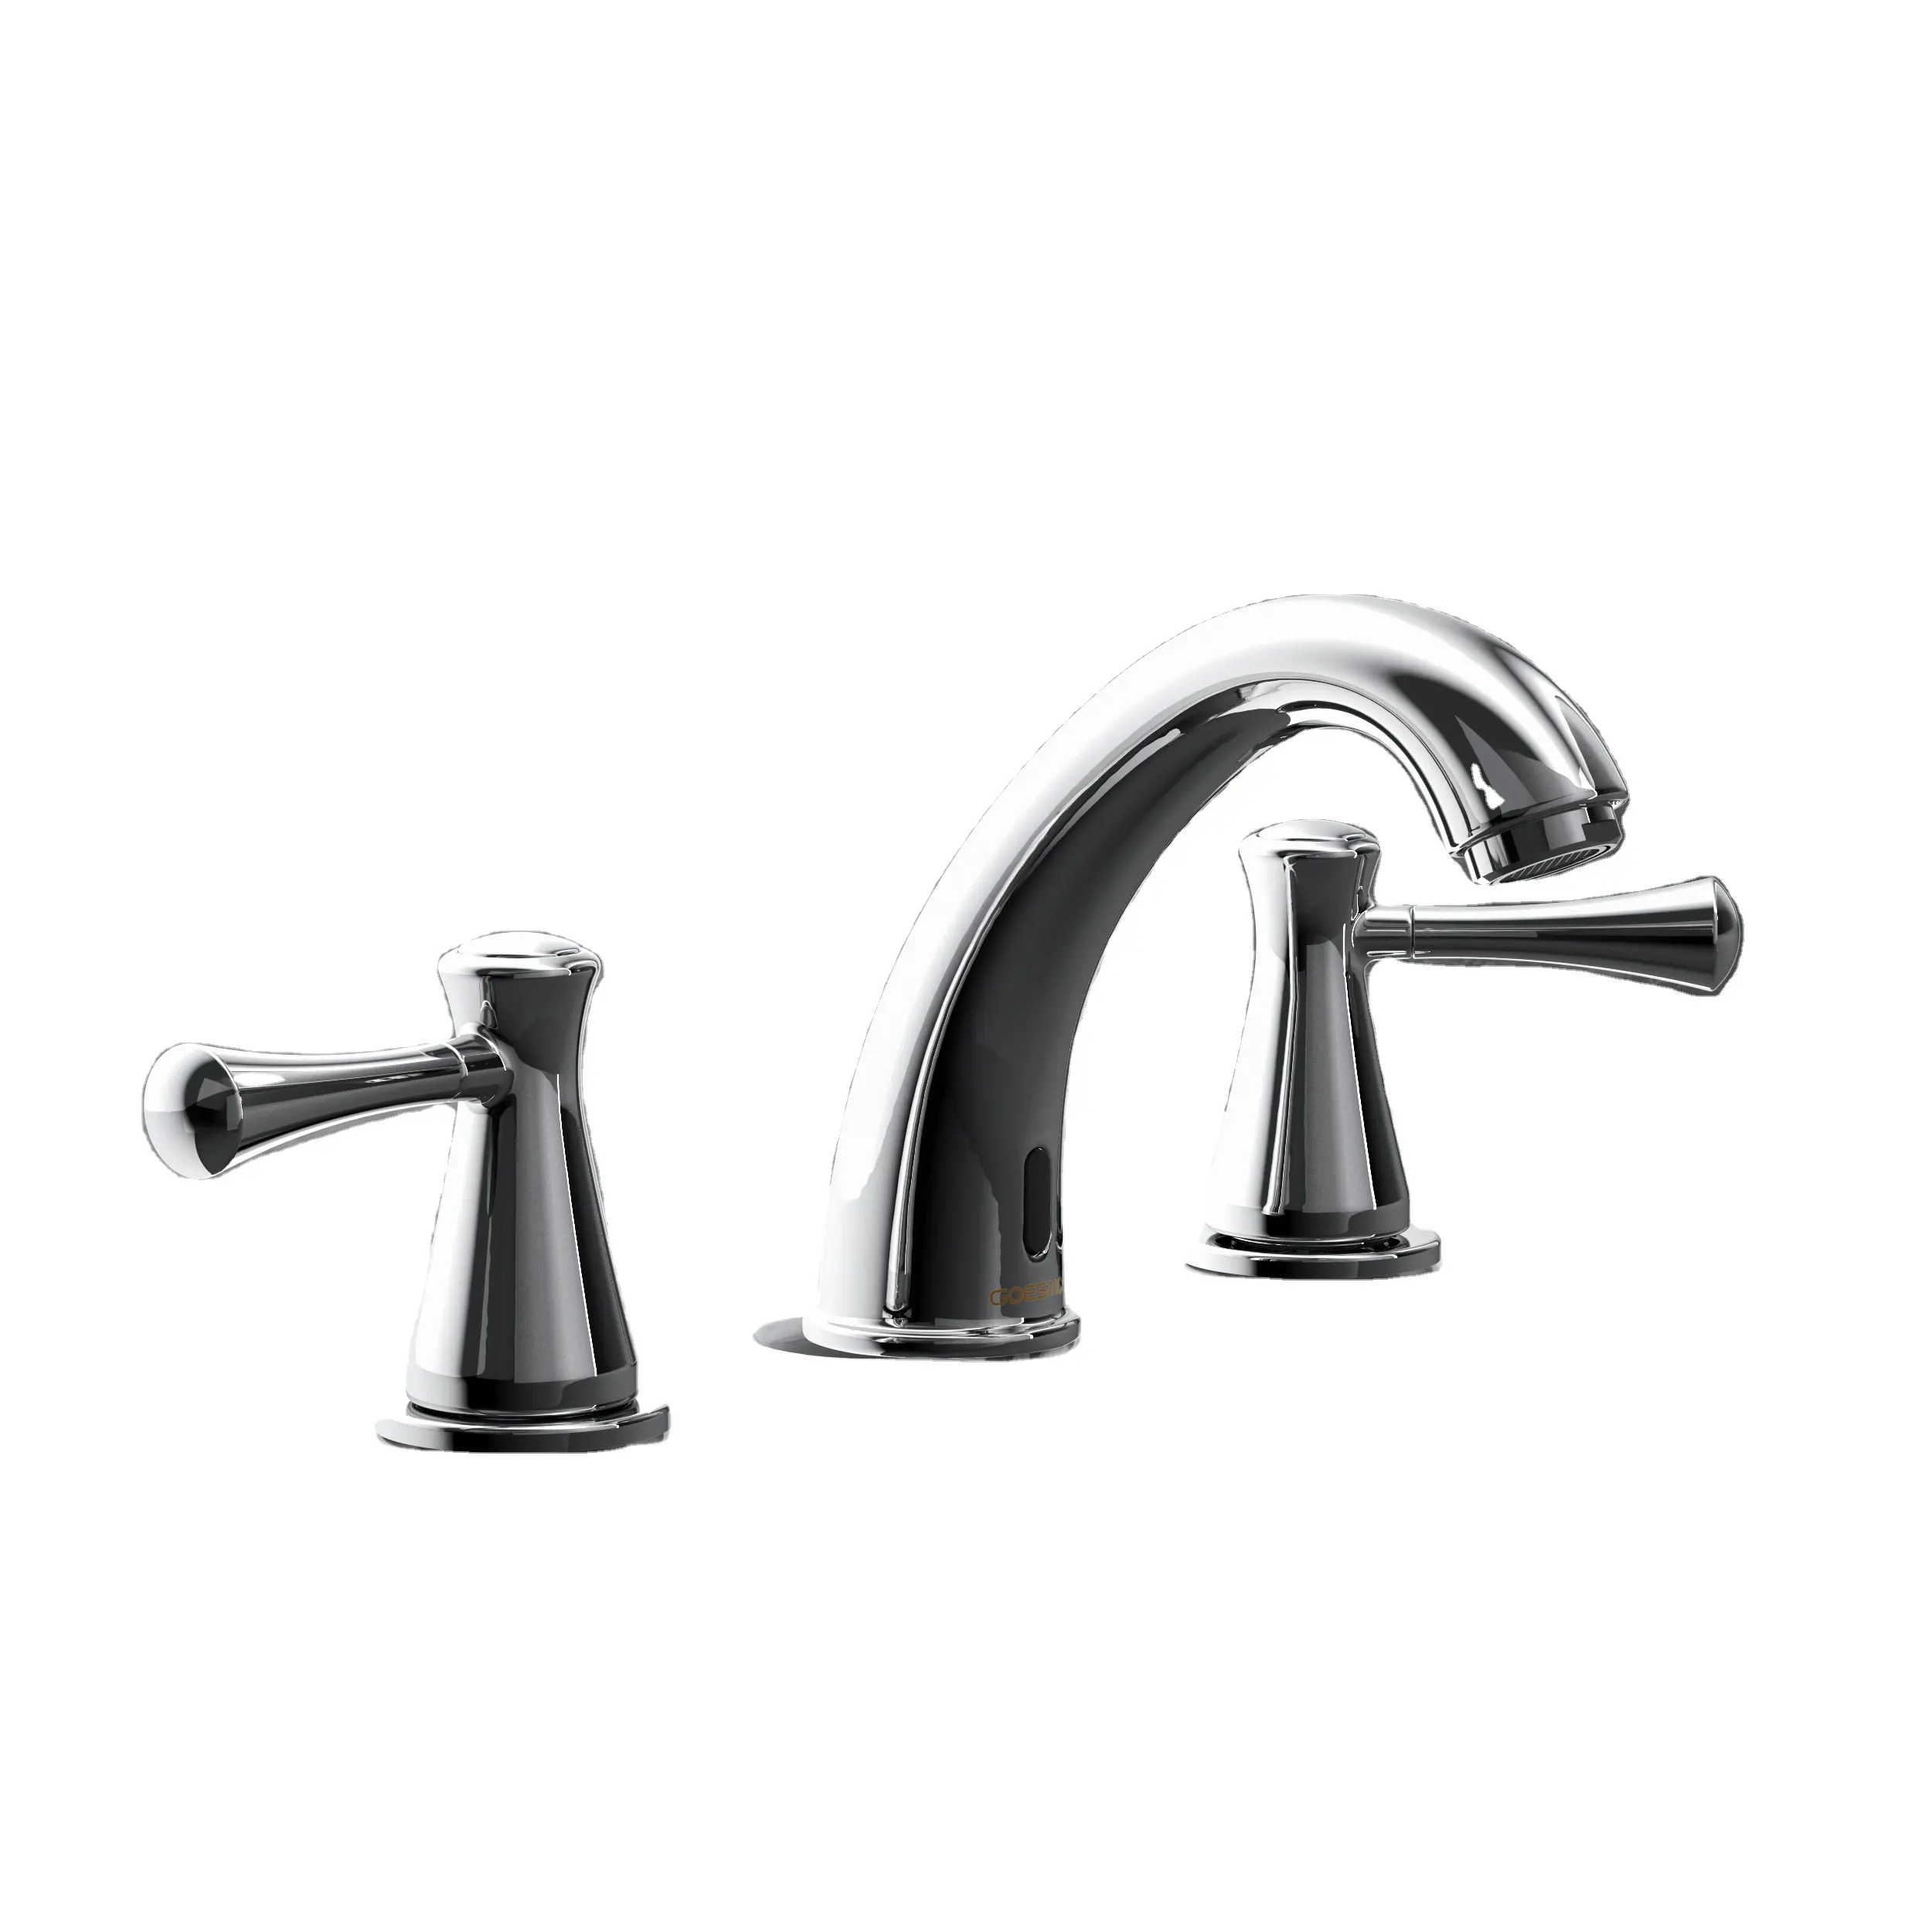 Deck Mounted Double Handle Faucets Automatic Taps Touchless Amazon Top Sell Kitchen Faucets Sink Faucet